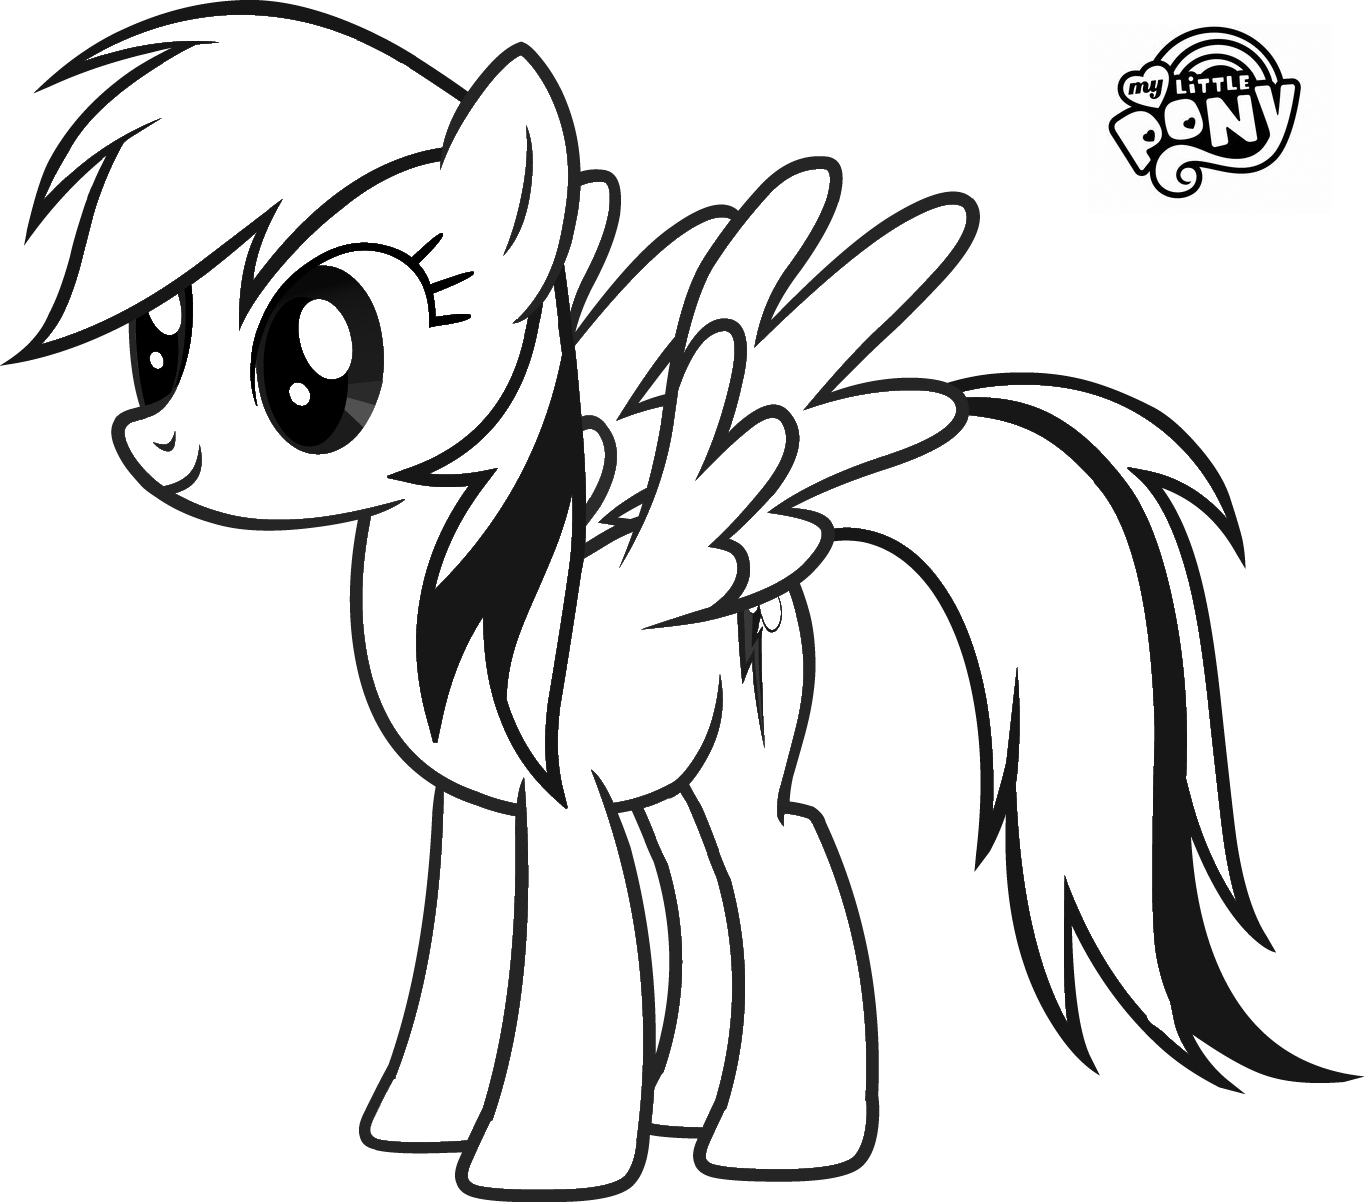 My Little Pony Rainbow Dash Coloring Pages pour Coloriage My Little Pony Rainbow Dash